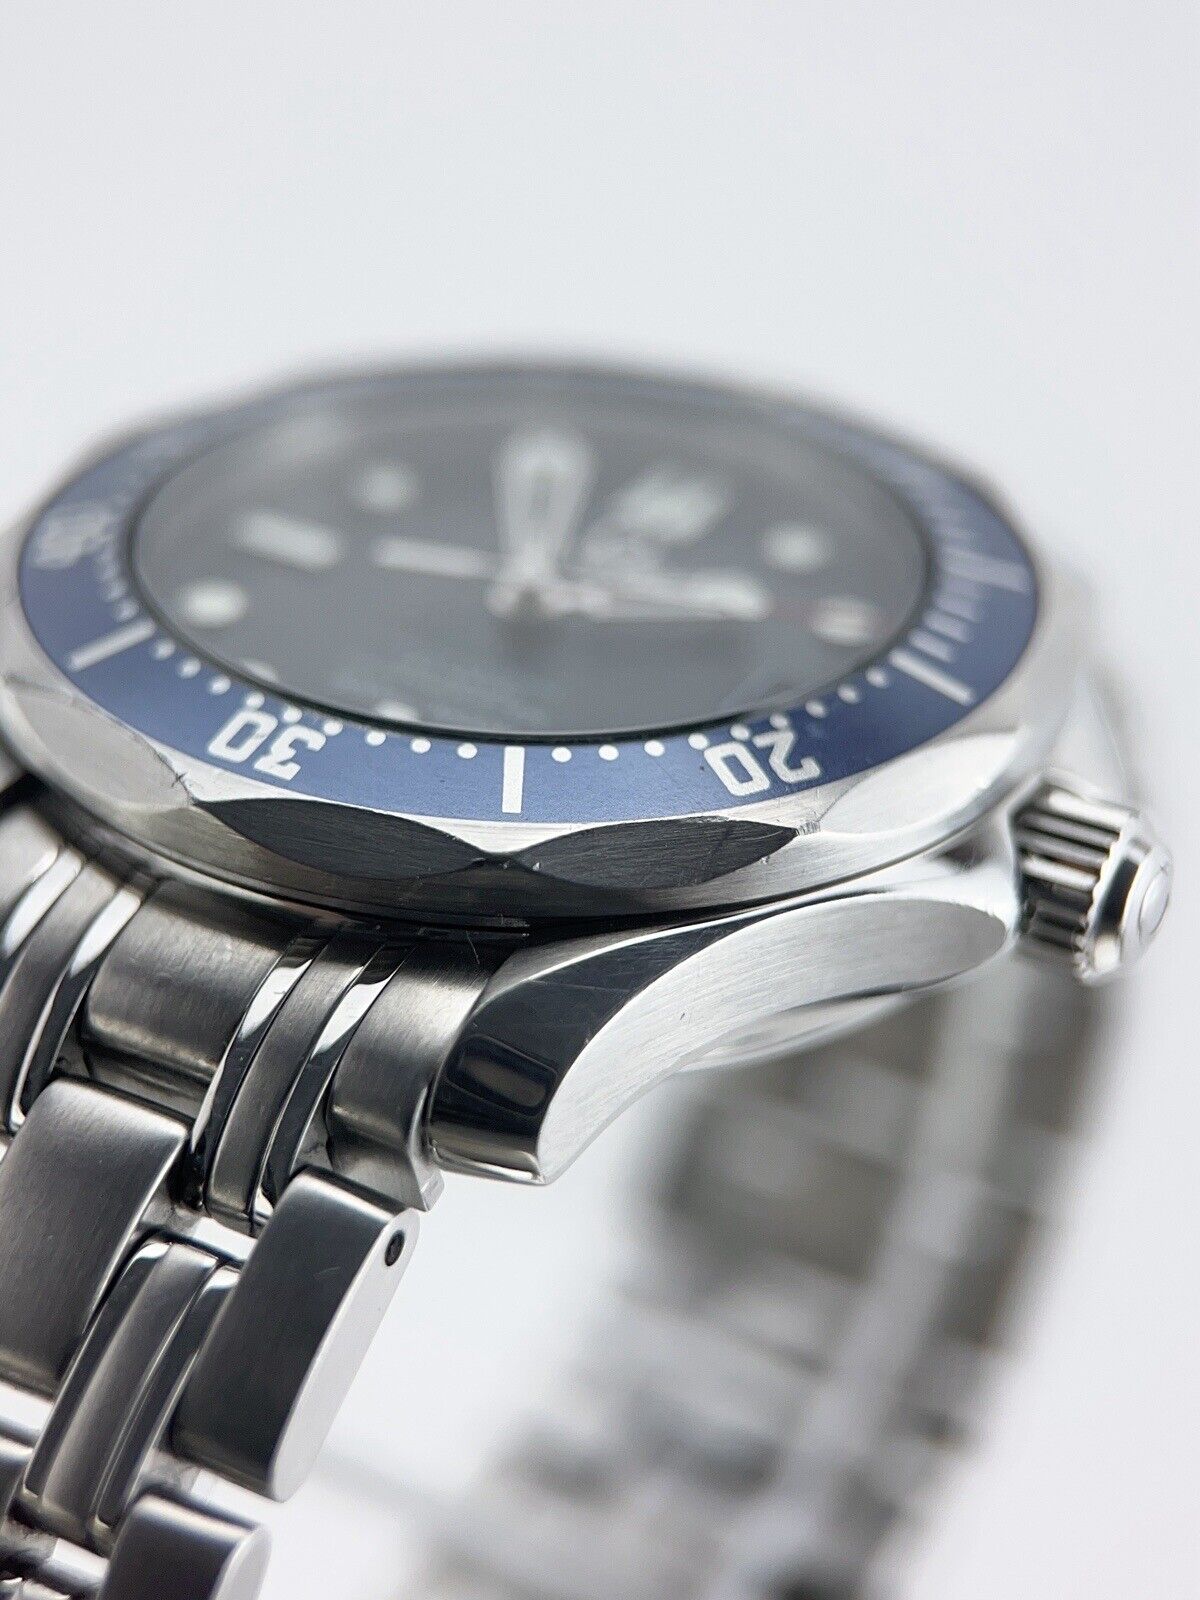 Omega Seamaster Diver 300m Blue Steel 36mm Automatic Men’s Watch 2222.80.00